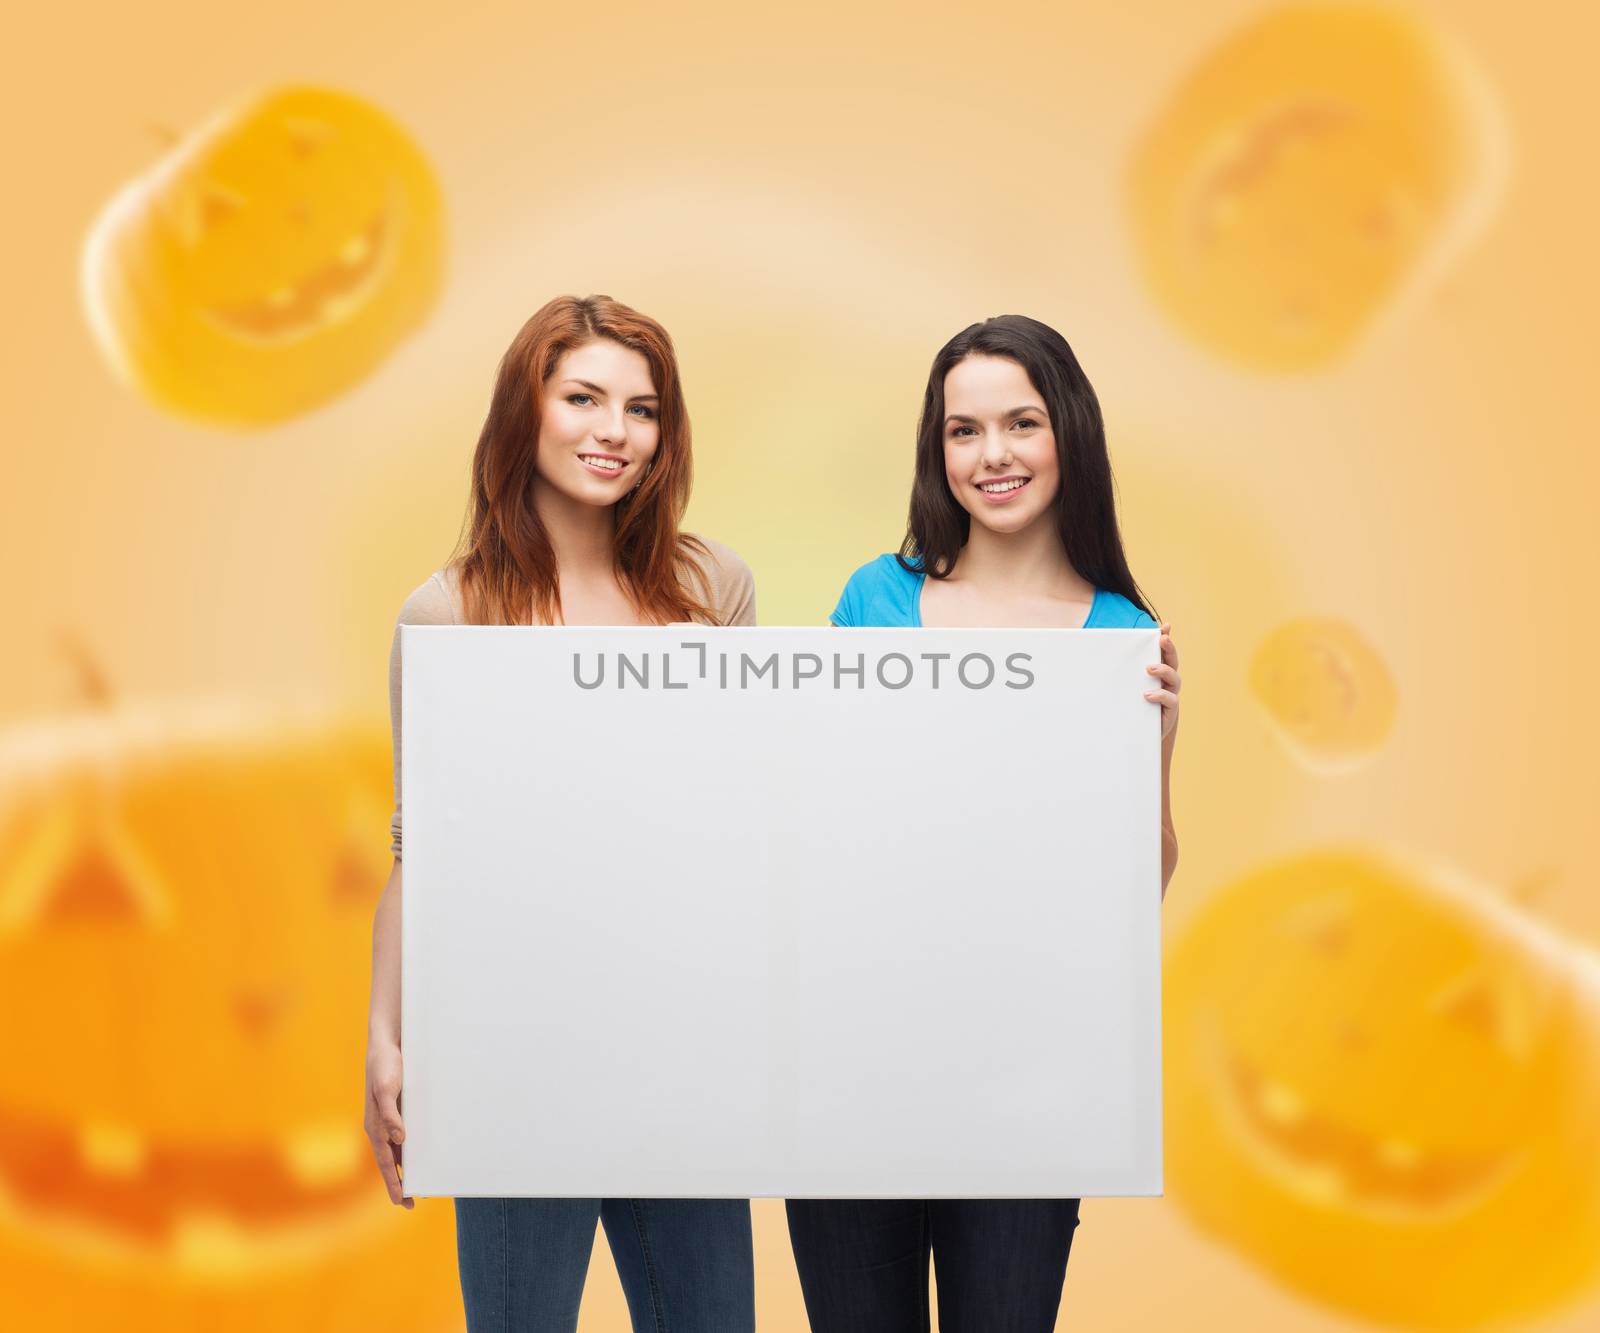 advertising, education, holidays and people concept - smiling teenage girsl with white board over halloween pumpkins background